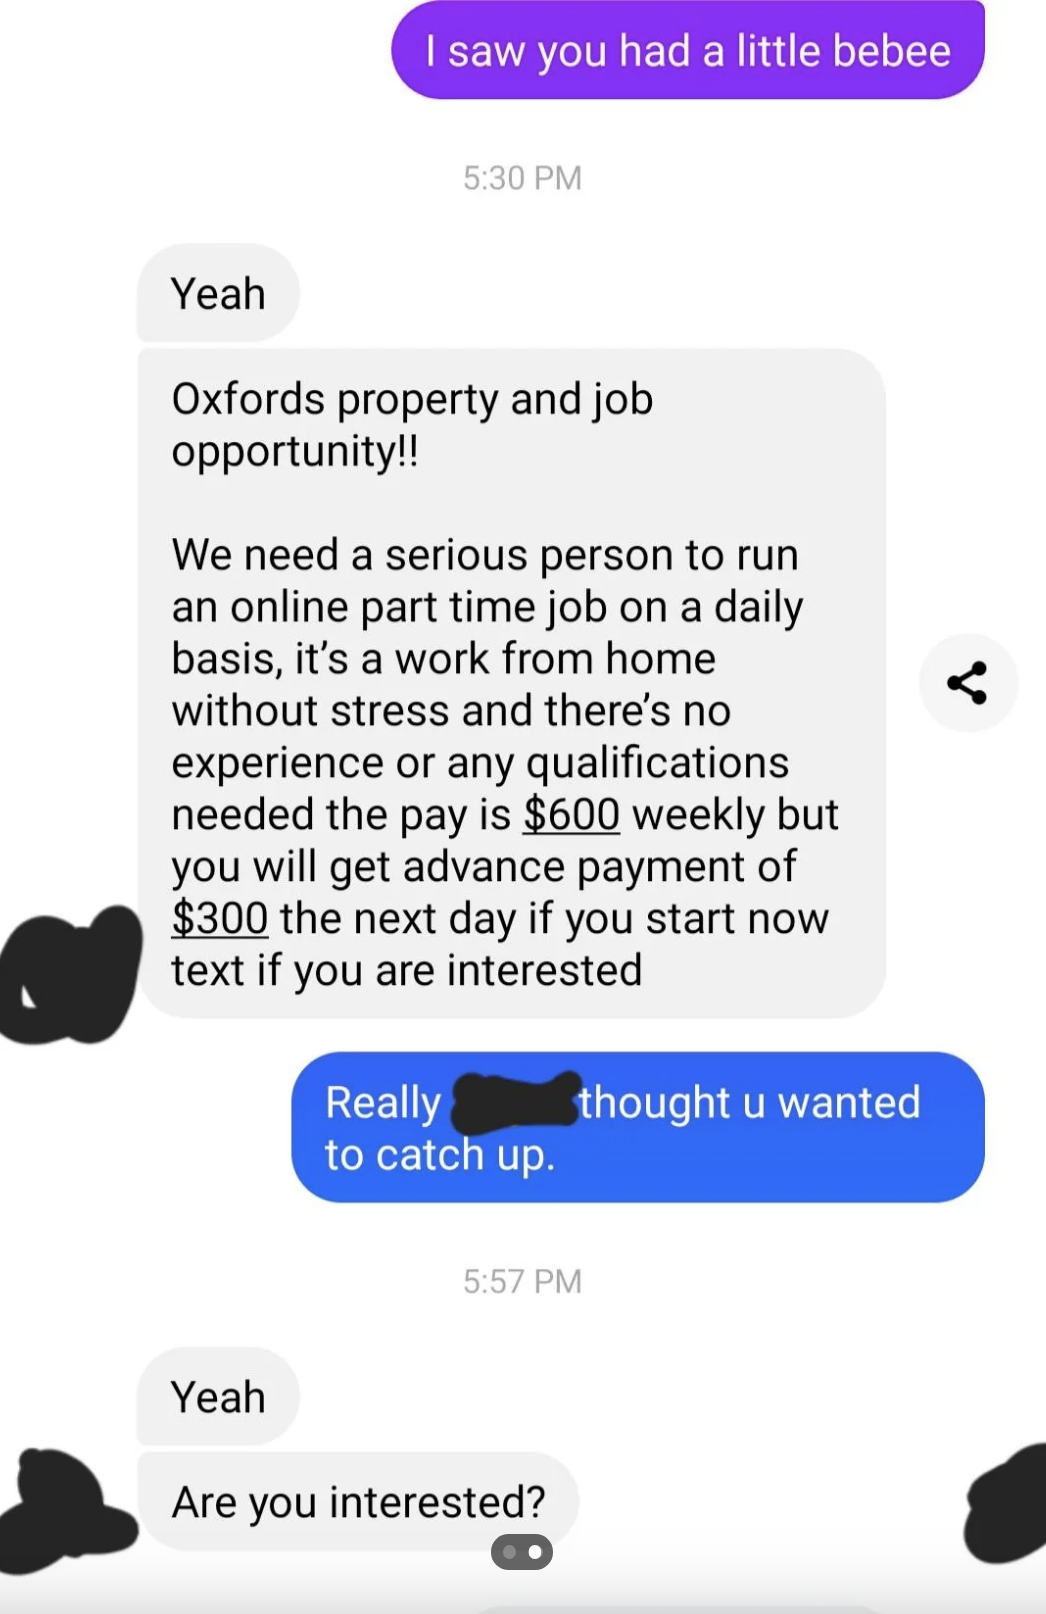 A screenshot of a text message conversation discussing a questionable job opportunity with advance payment terms